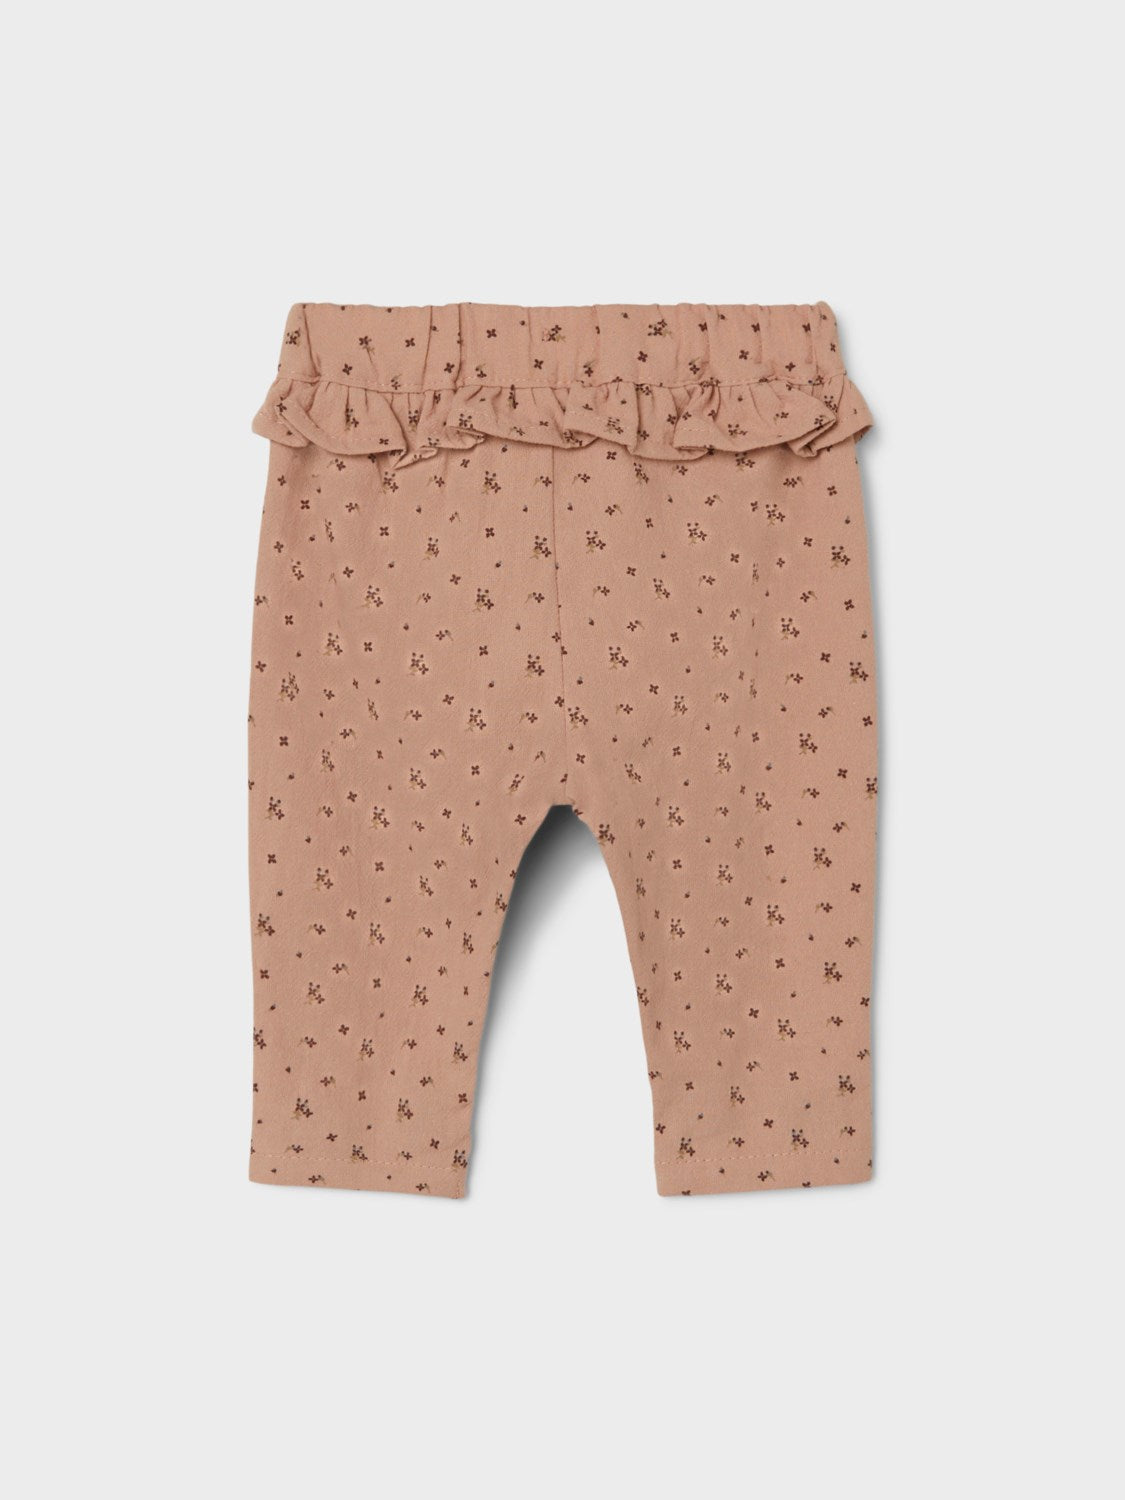 Lil Atelier Fola Loose Pants Baby - Sirocco